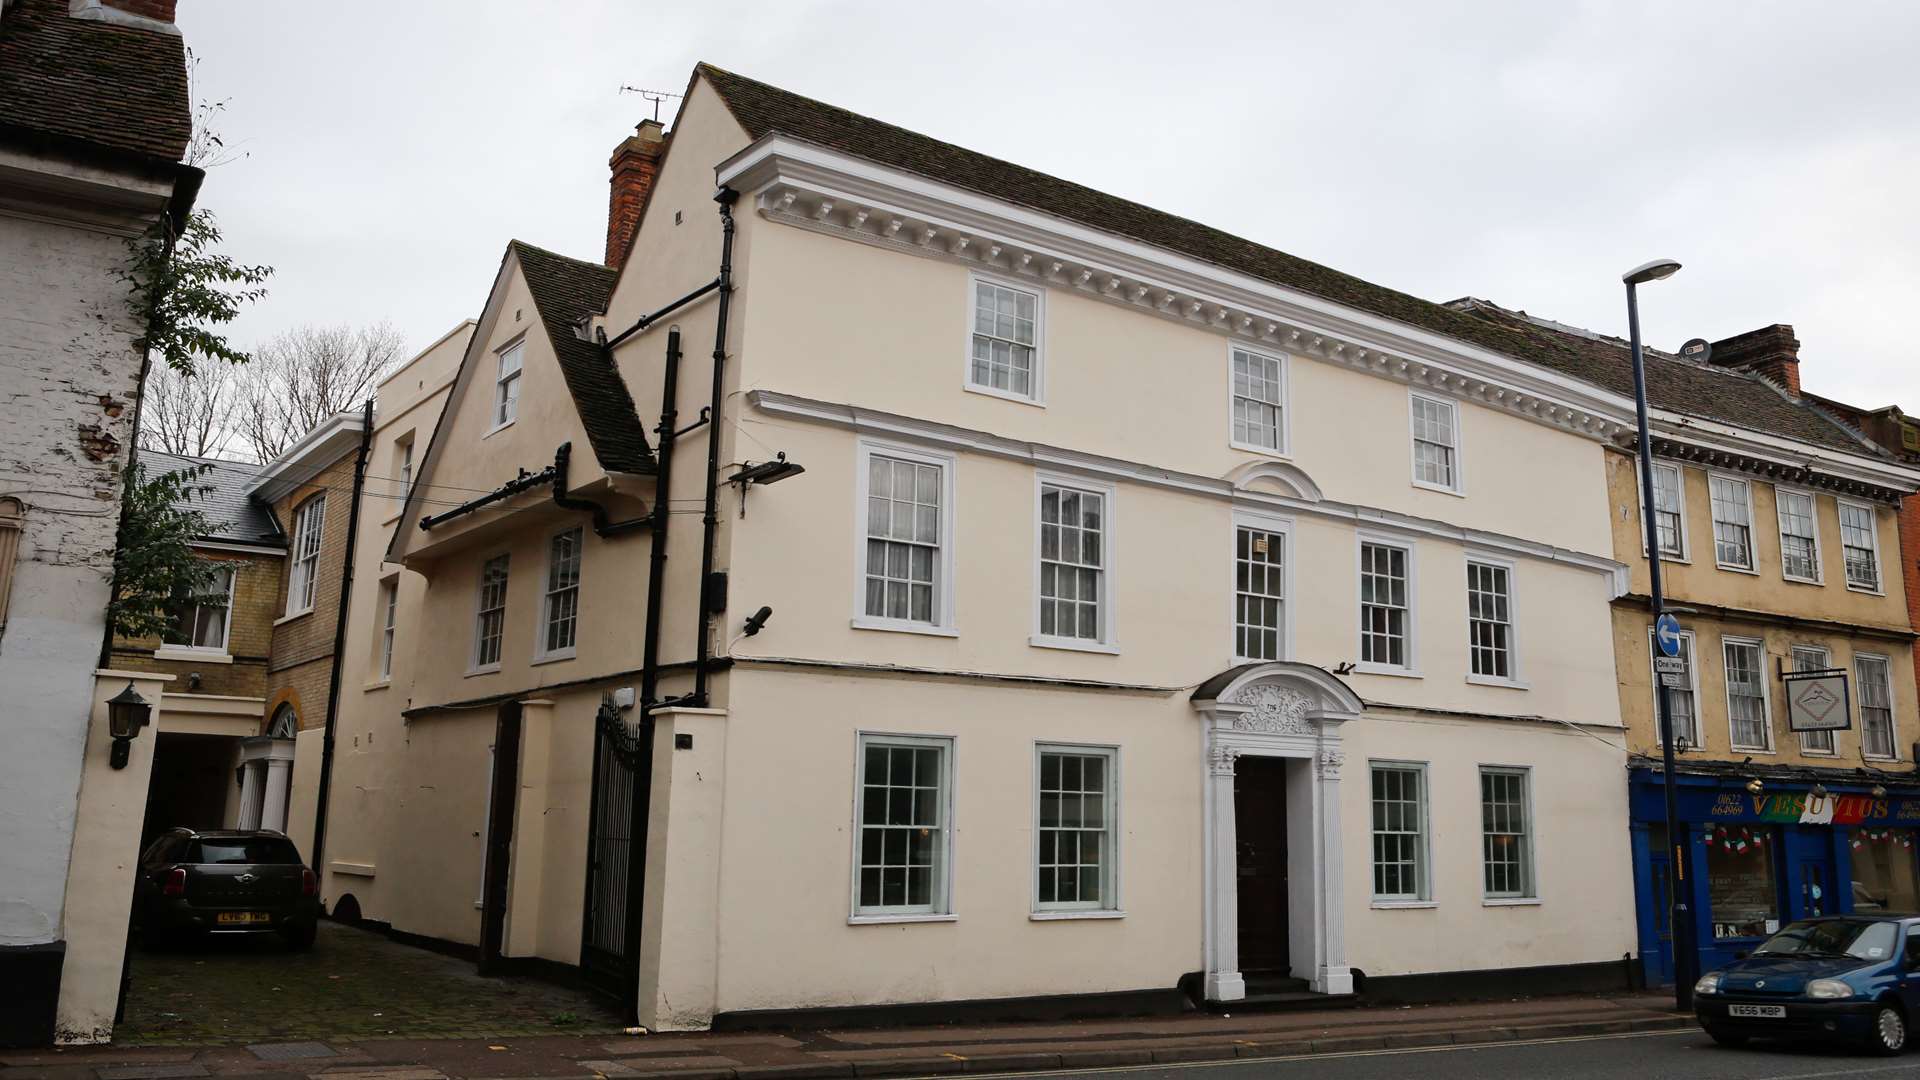 The Stone Court Hotel in Maidstone could be turned into 14 flats.